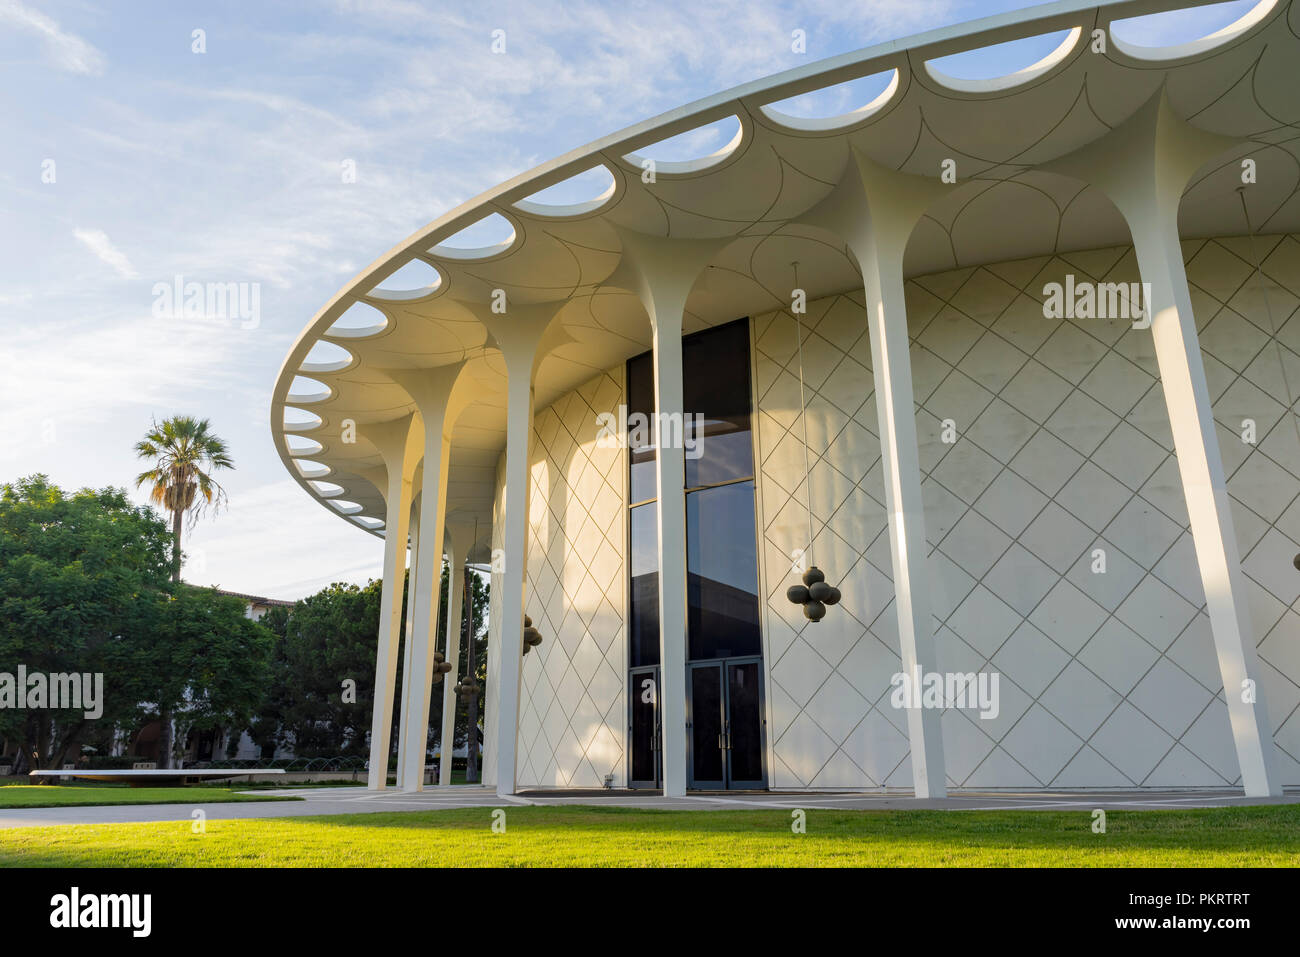 Los Angeles, OCT 5: Exterior view of Beckman Auditorium in Caltech on OCT 5, 2016 at Los Angeles, California Stock Photo